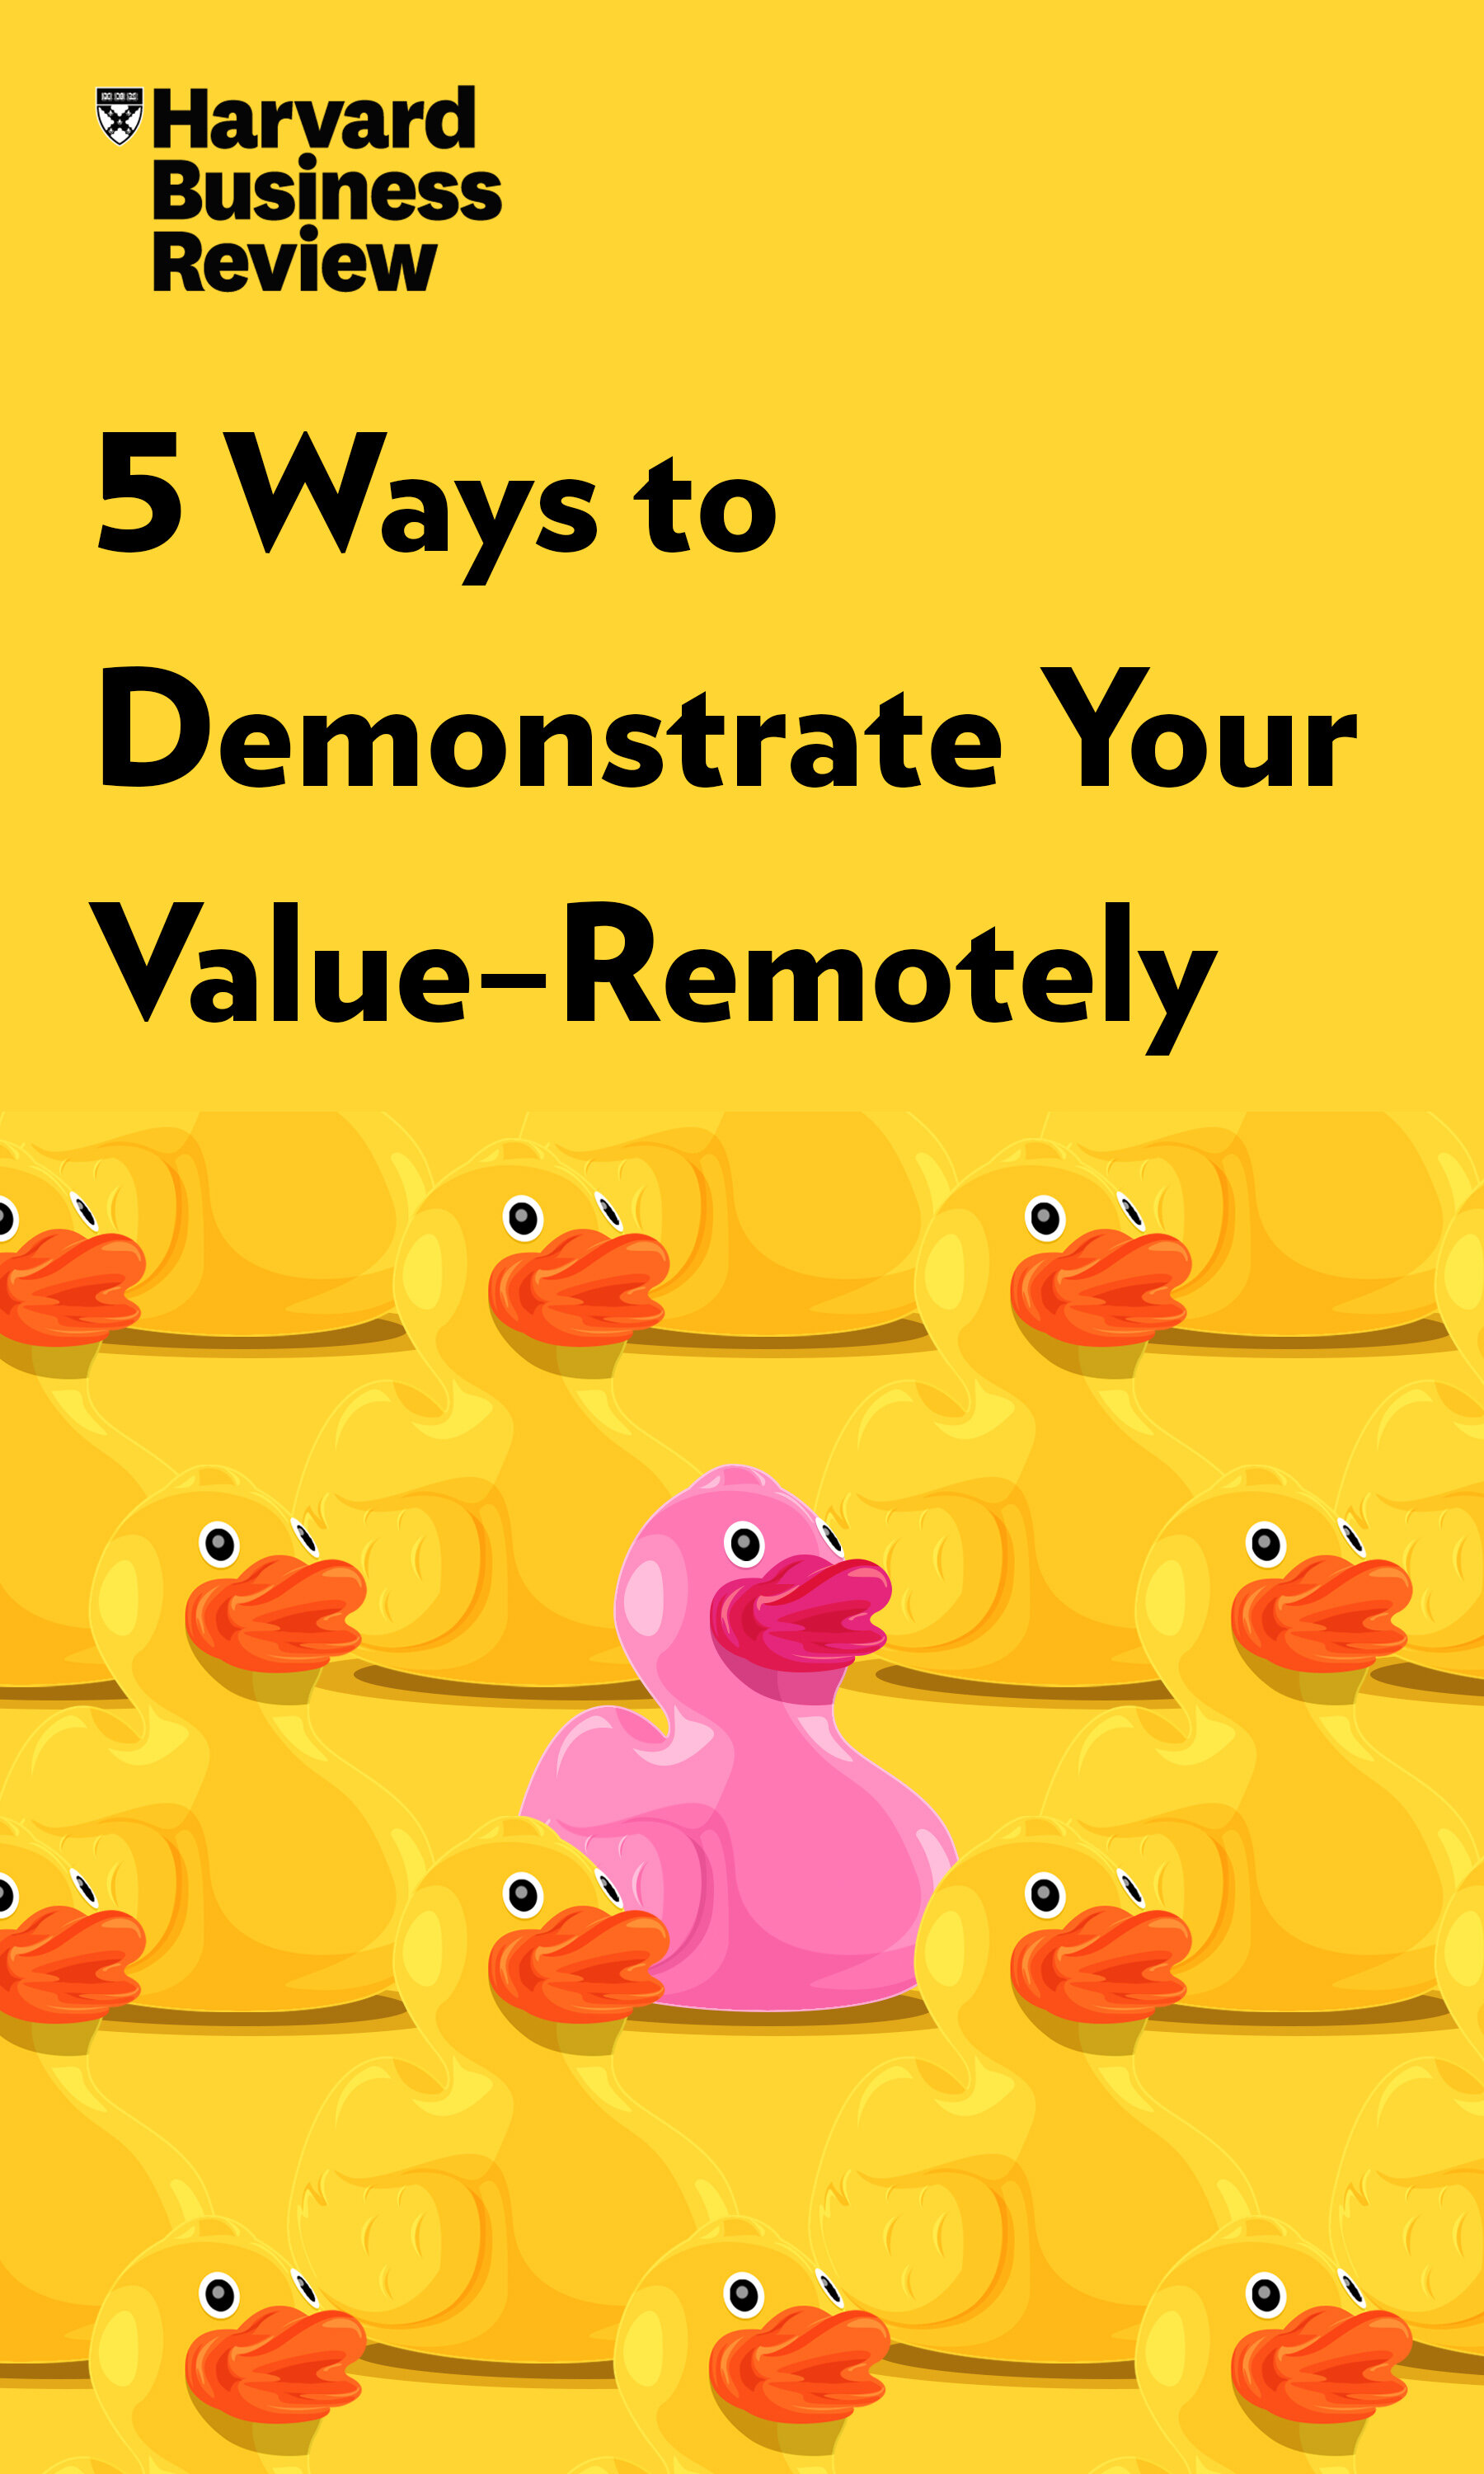 5-Ways-to-Demonstrate-Your-Value-Remotely-eBook.jpg